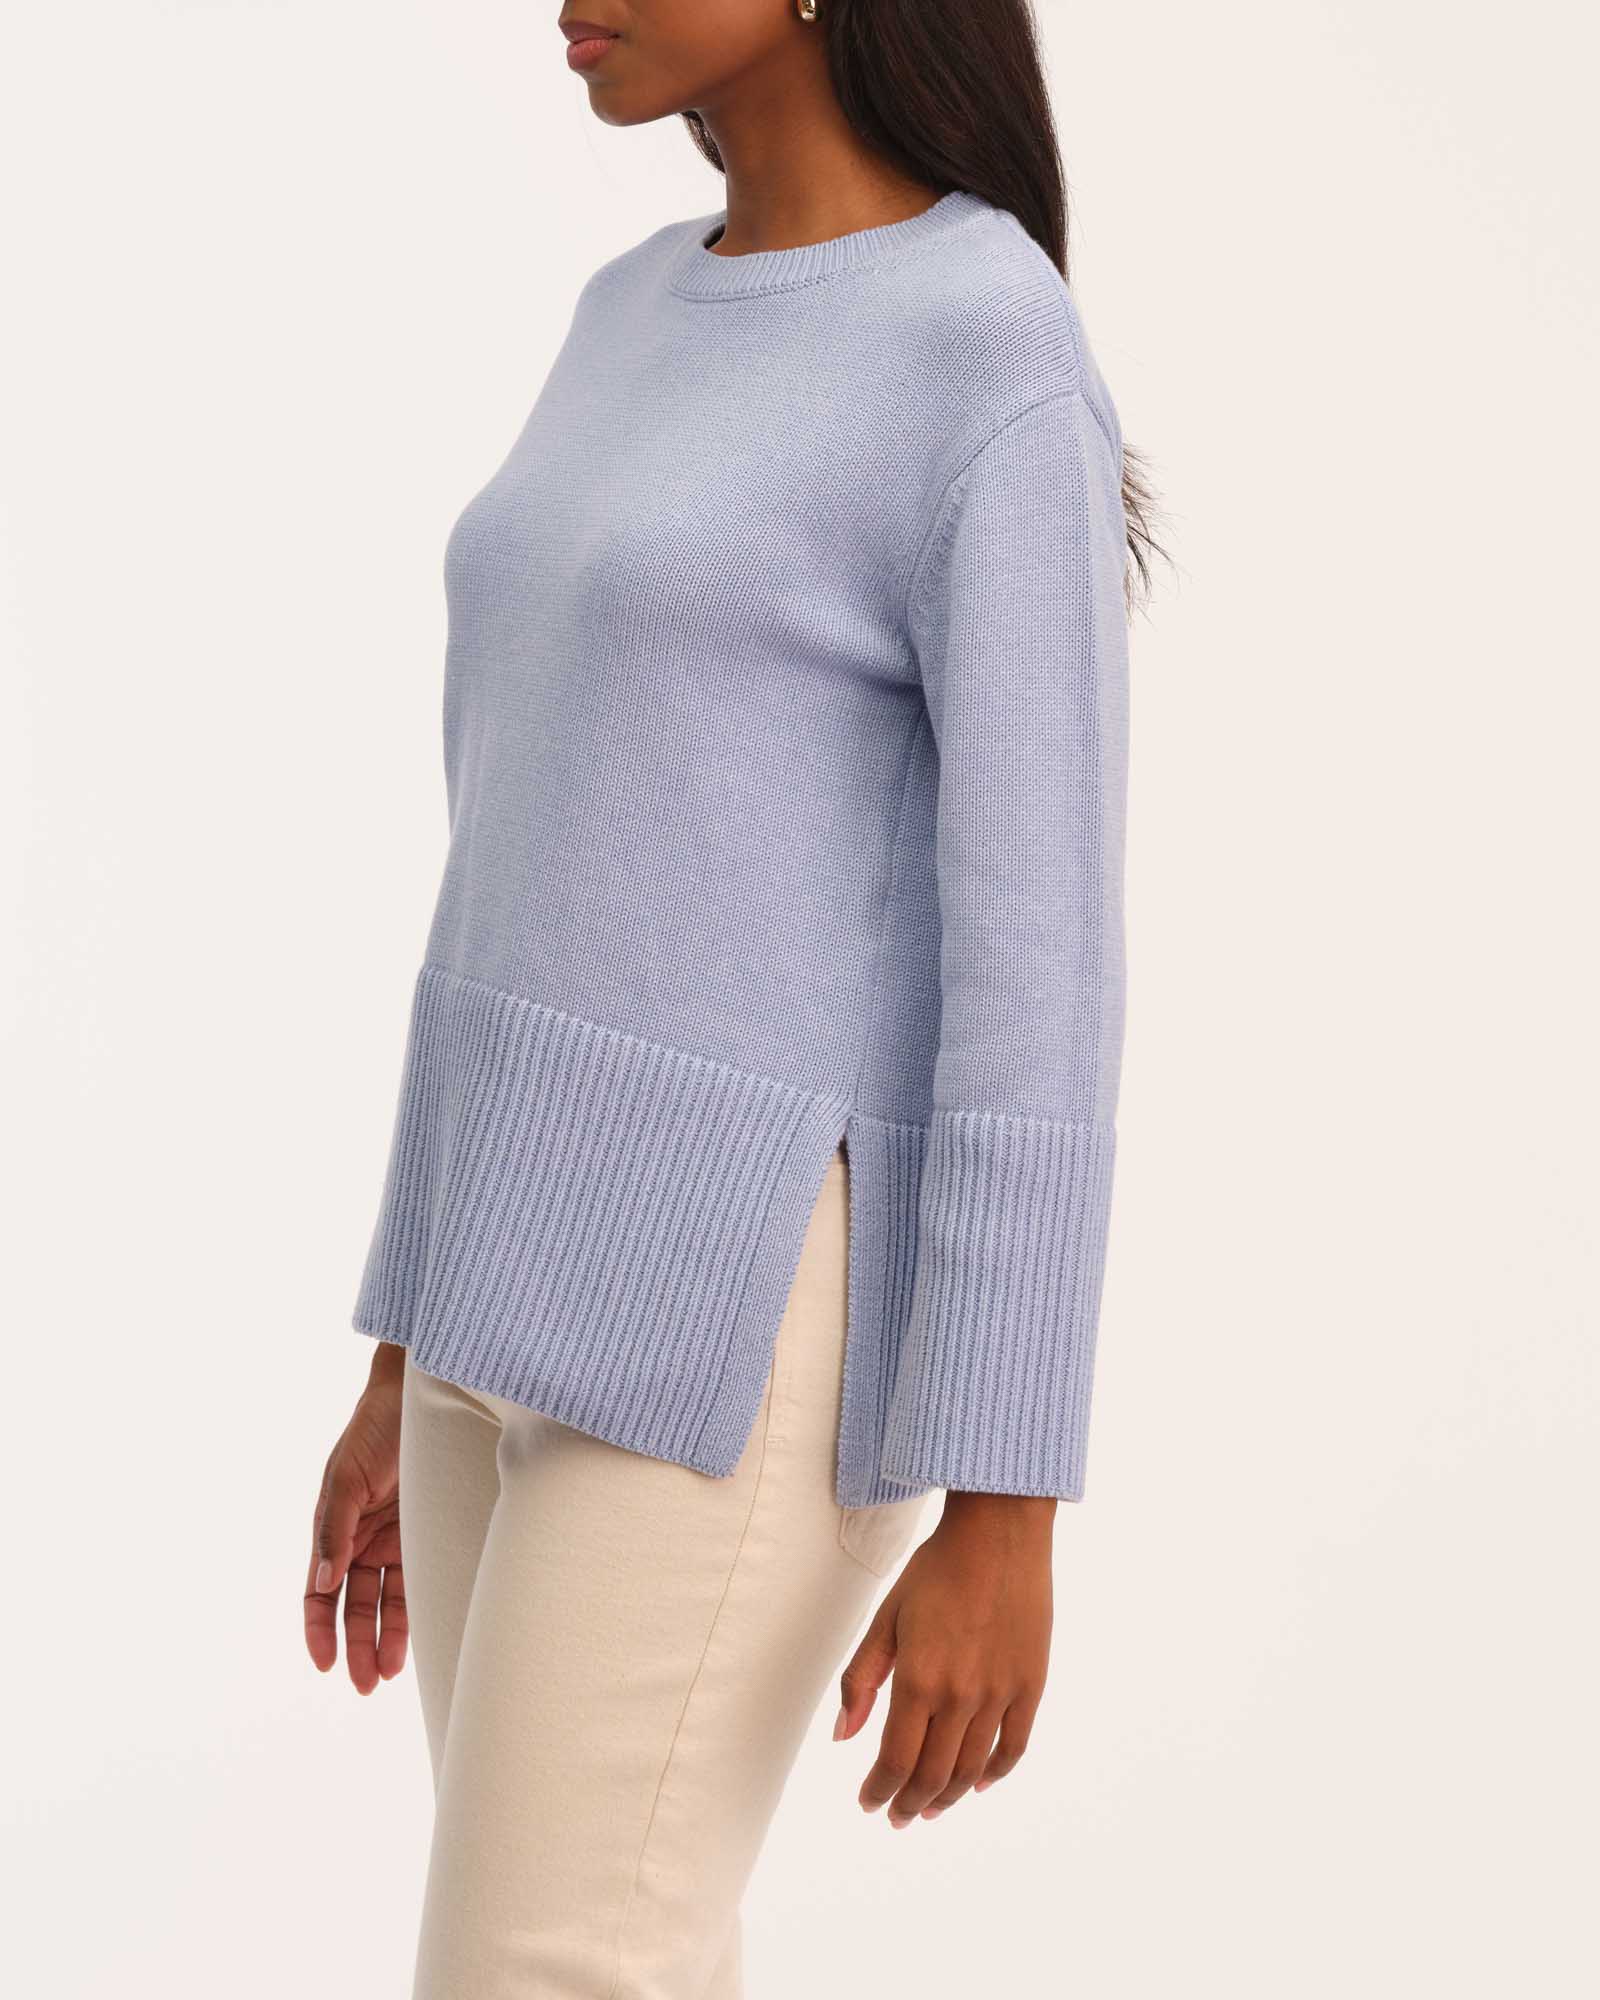 For The Republic Women's Classic Crewneck Sweater with Side Vents | JANE + MERCER